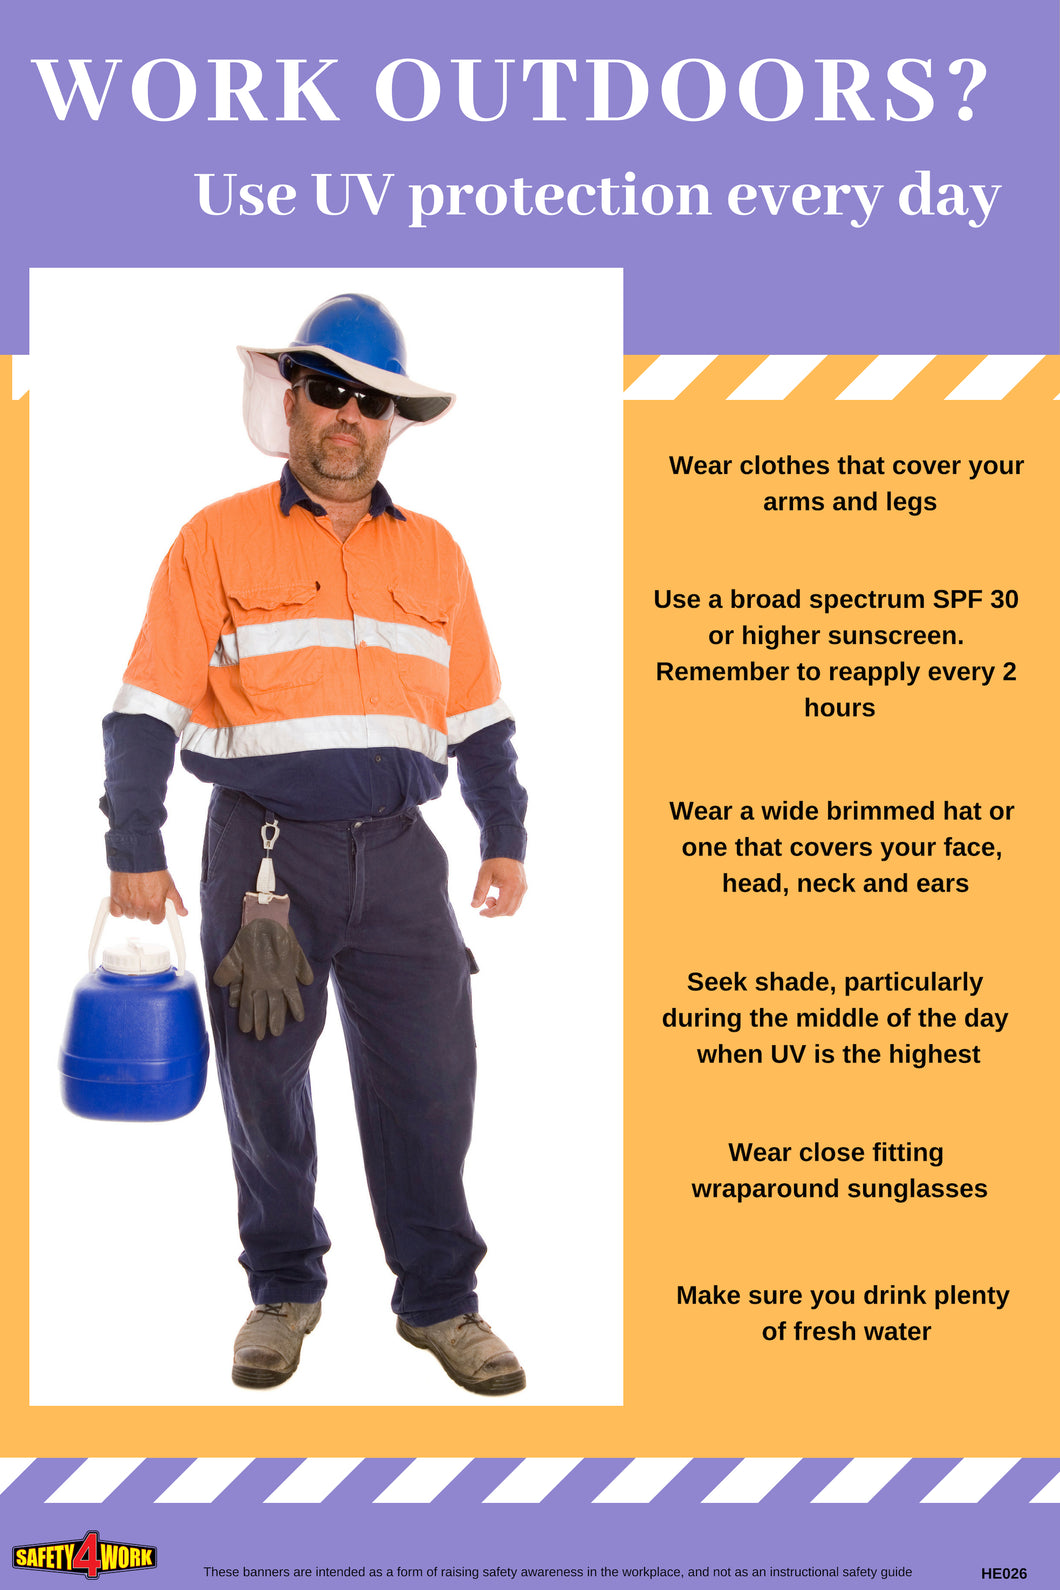 HE026- Health Workplace Safety Poster